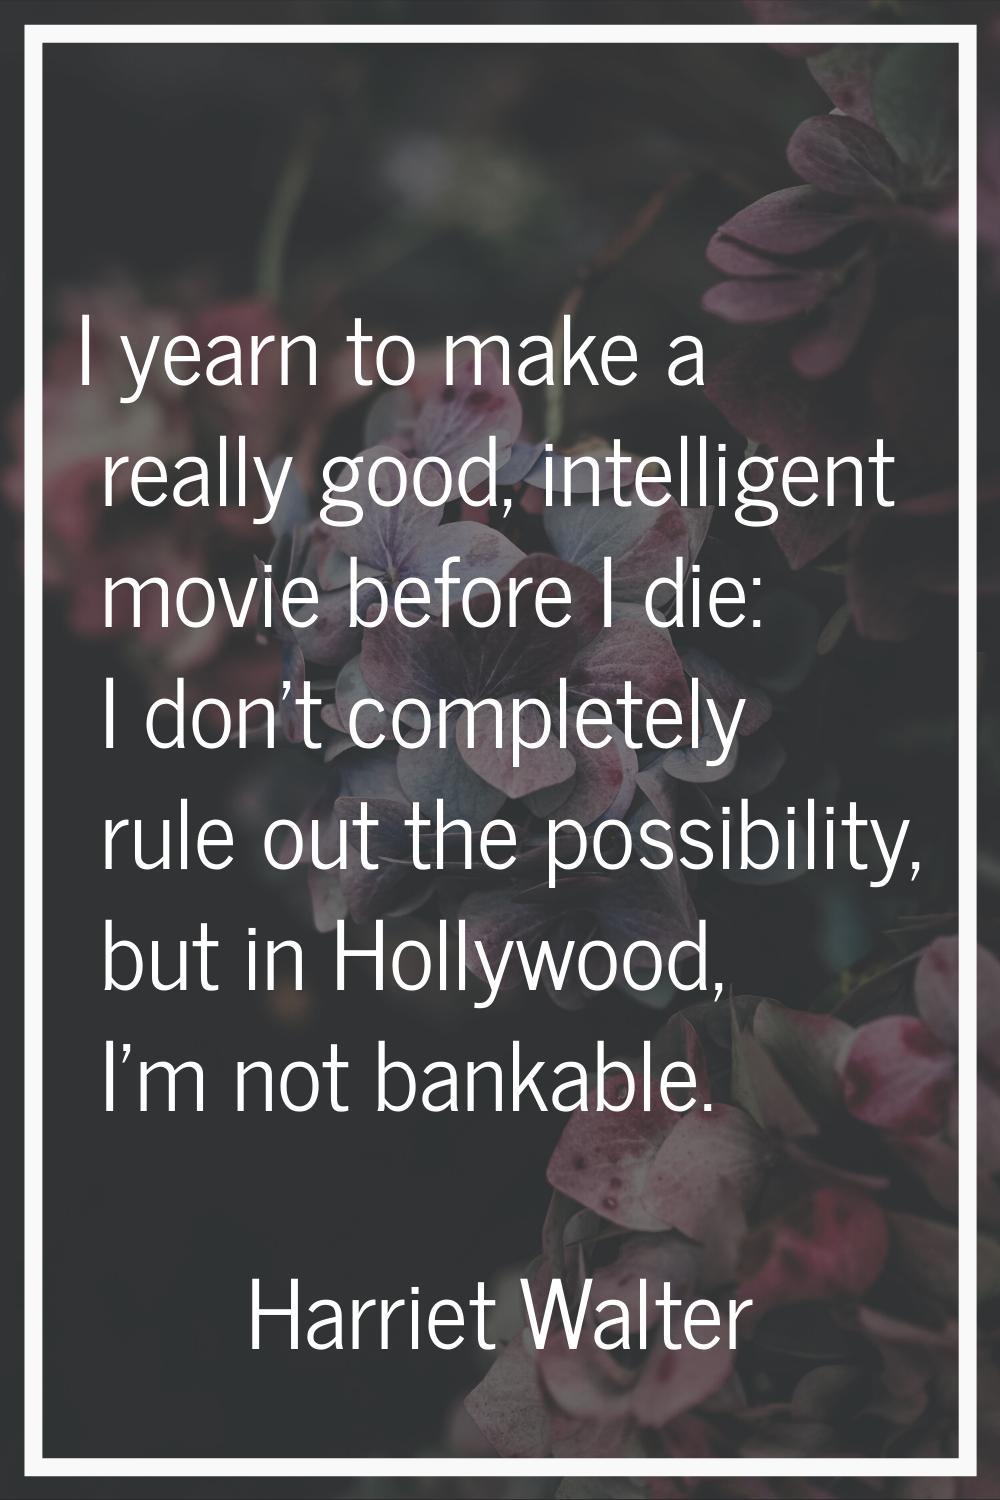 I yearn to make a really good, intelligent movie before I die: I don't completely rule out the poss